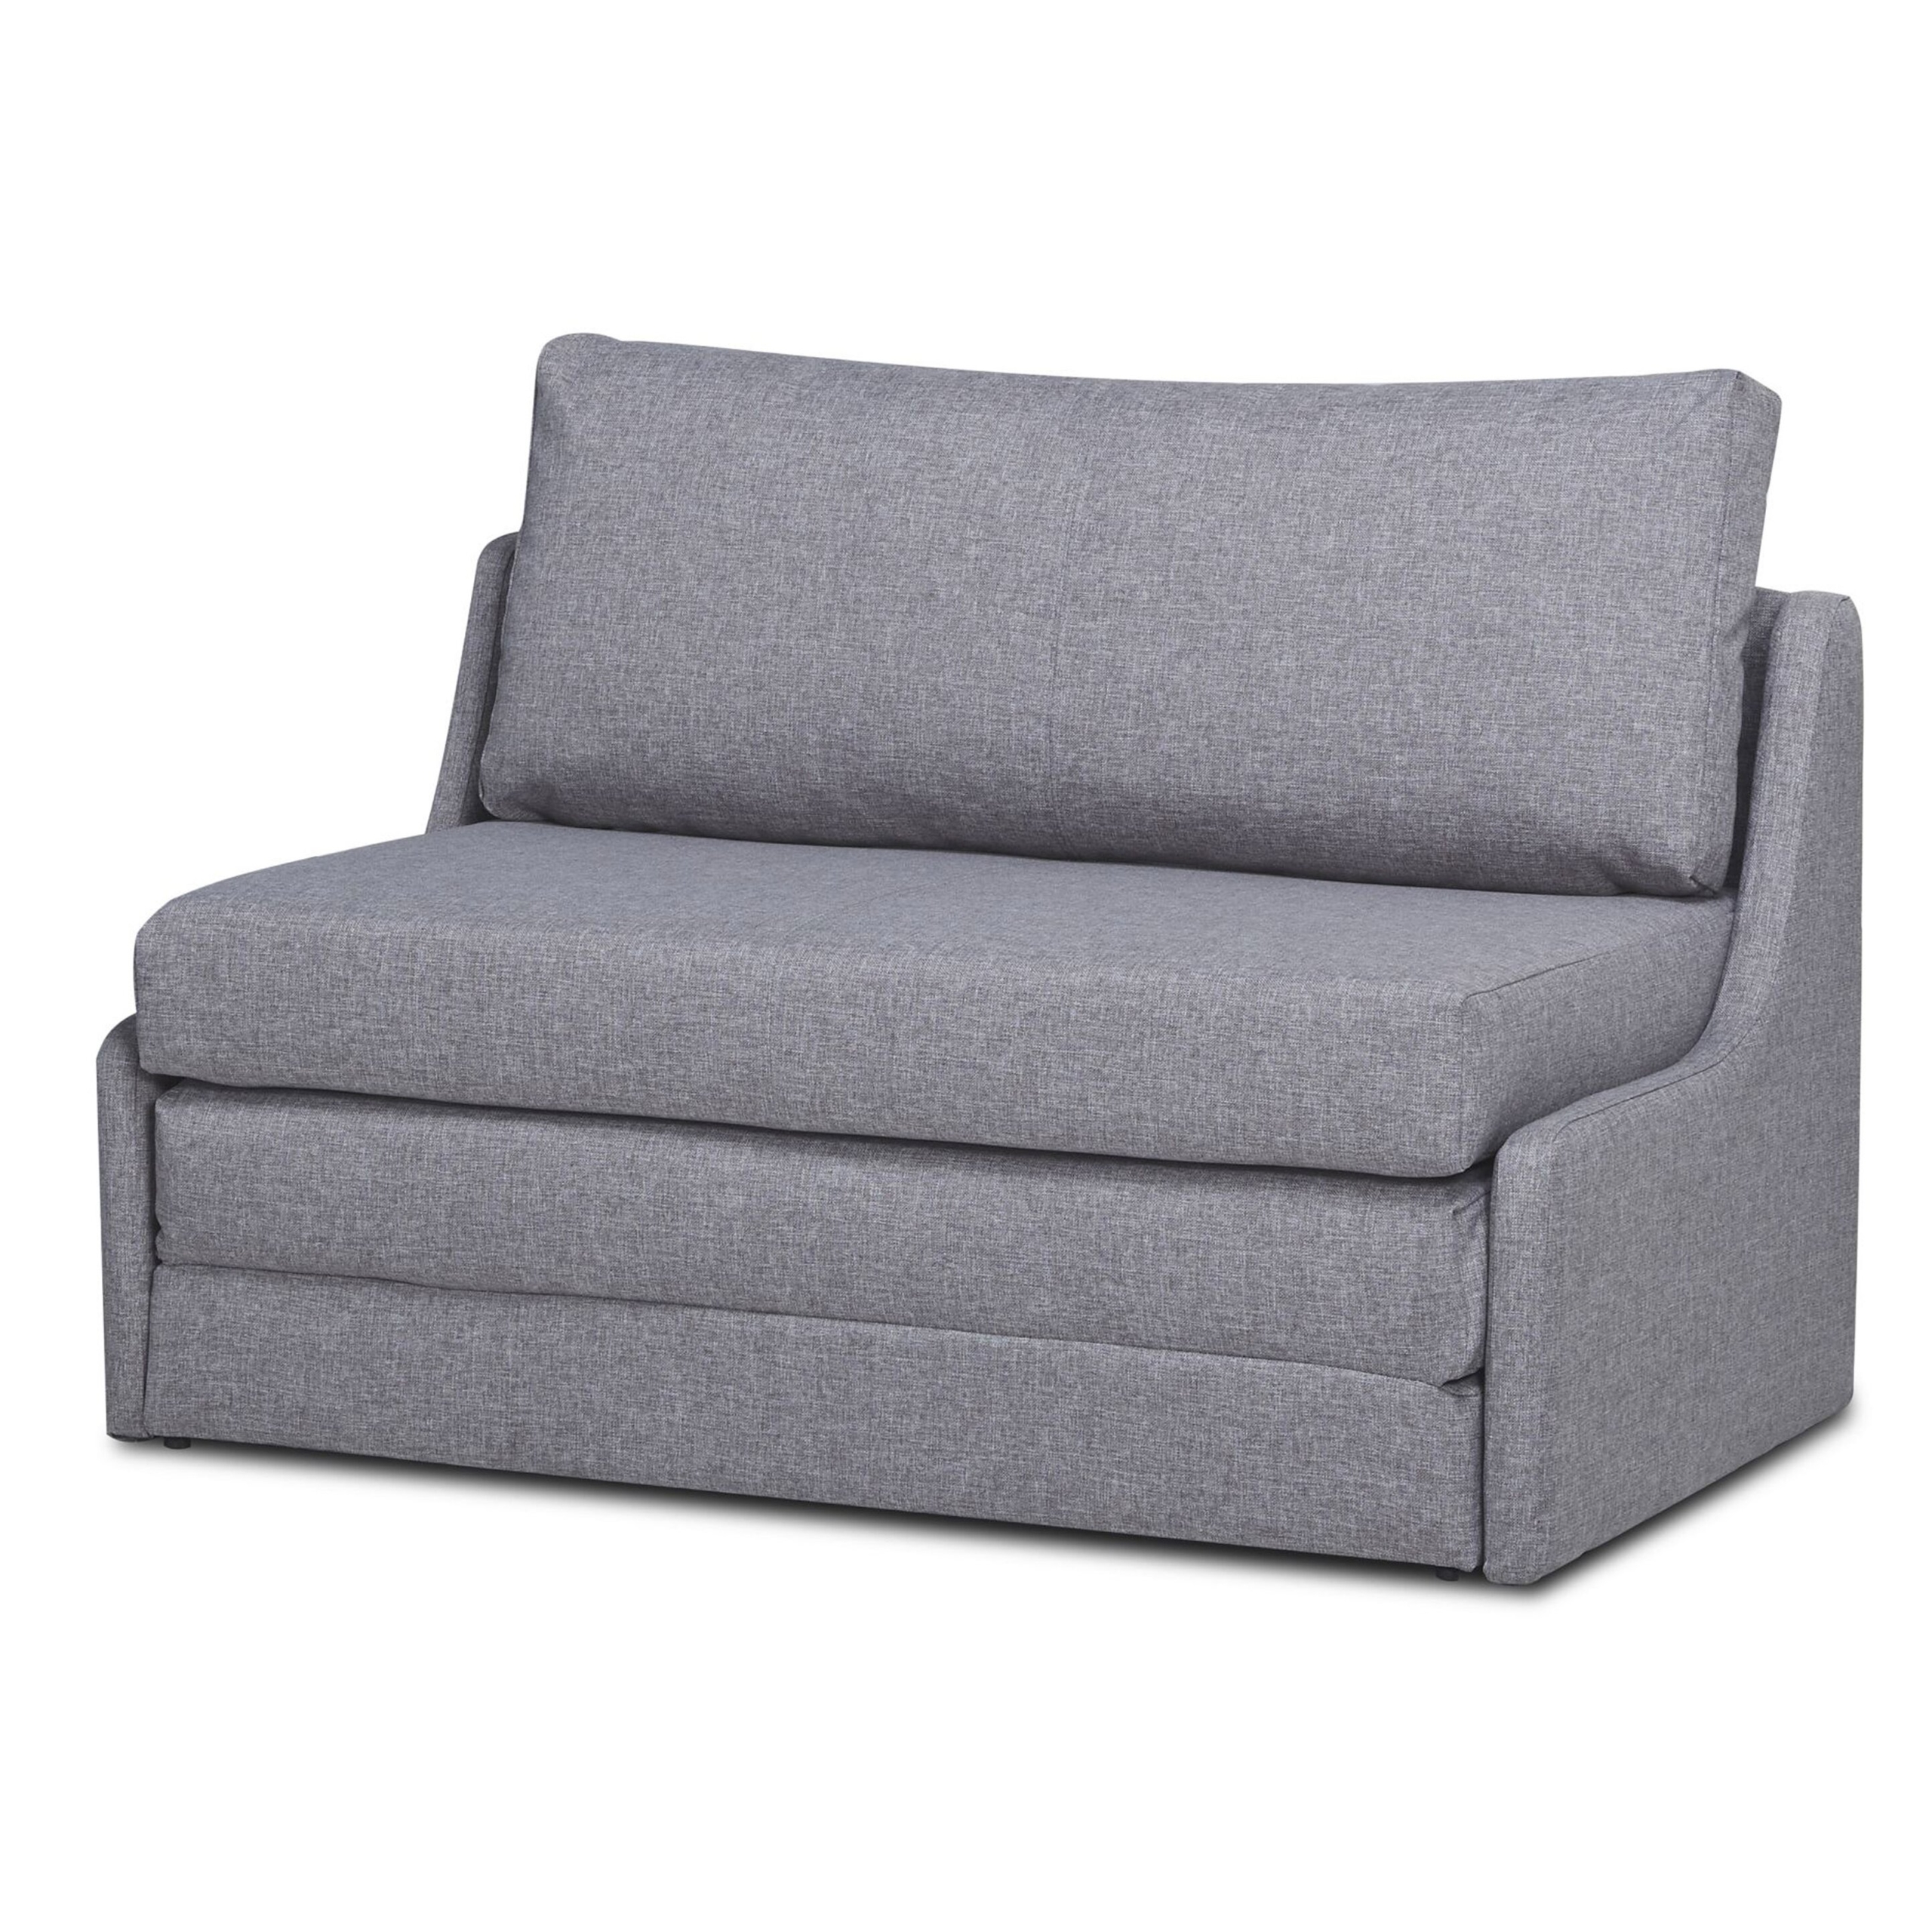 Loveseat Twin Sleeper Sofa Visualhunt, Fold Out Twin Bed Couch